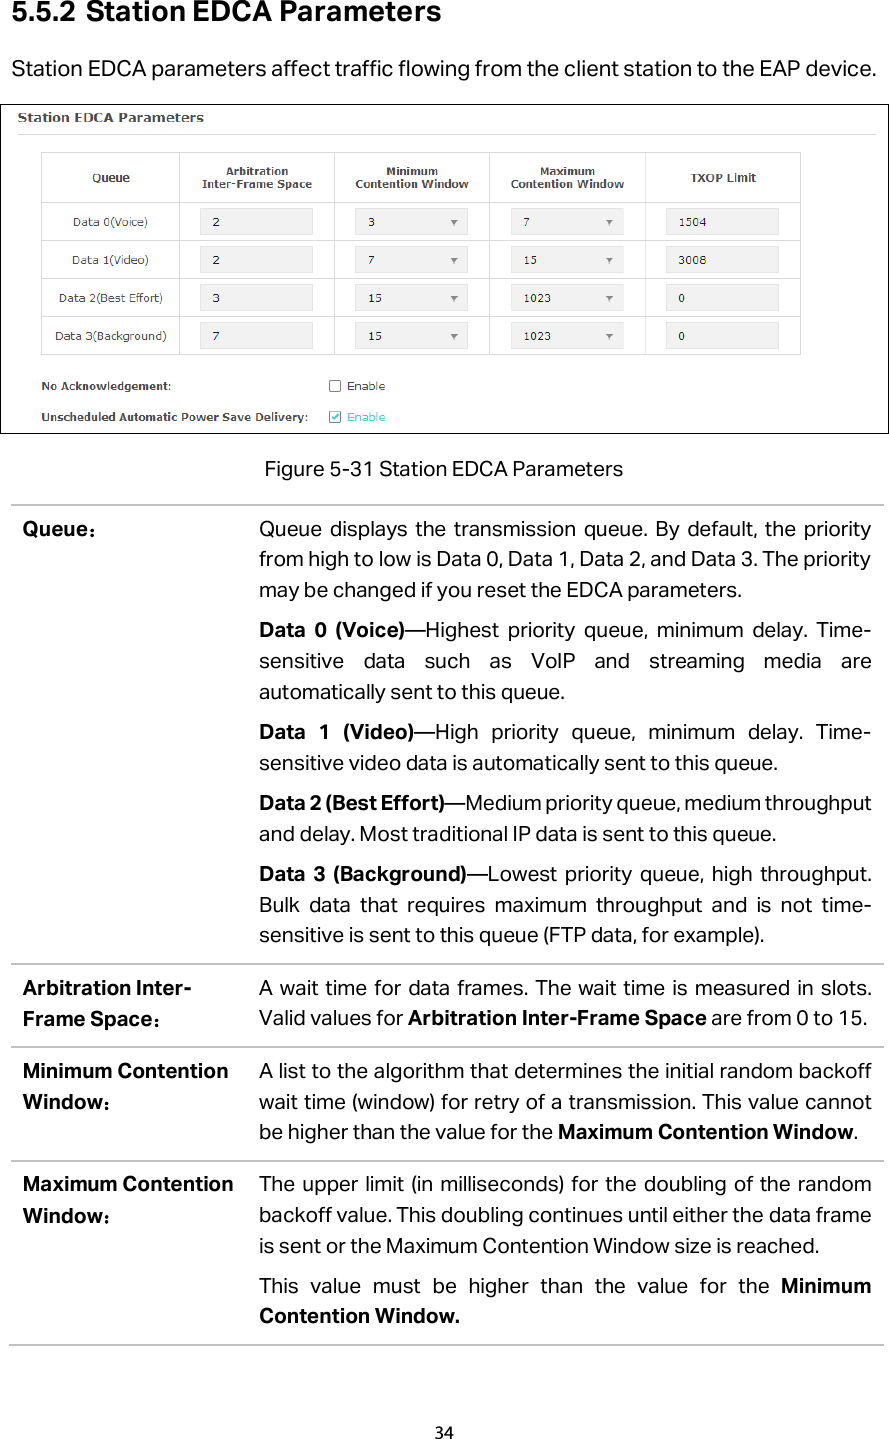 5.5.2 Station EDCA Parameters Station EDCA parameters affect traffic flowing from the client station to the EAP device.  Figure 5-31 Station EDCA Parameters Queue： Queue displays the transmission queue. By default, the priority from high to low is Data 0, Data 1, Data 2, and Data 3. The priority may be changed if you reset the EDCA parameters. Data 0 (Voice)—Highest priority queue, minimum delay. Time-sensitive data such as VoIP and streaming media are automatically sent to this queue. Data 1 (Video)—High priority queue, minimum delay. Time-sensitive video data is automatically sent to this queue. Data 2 (Best Effort)—Medium priority queue, medium throughput and delay. Most traditional IP data is sent to this queue. Data  3 (Background)—Lowest priority queue, high throughput. Bulk data that requires maximum throughput and is not time-sensitive is sent to this queue (FTP data, for example). Arbitration Inter-Frame Space： A wait time for data frames. The wait time is measured in slots. Valid values for Arbitration Inter-Frame Space are from 0 to 15. Minimum Contention Window： A list to the algorithm that determines the initial random backoff wait time (window) for retry of a transmission. This value cannot be higher than the value for the Maximum Contention Window. Maximum Contention Window： The upper limit (in milliseconds) for the doubling of the random backoff value. This doubling continues until either the data frame is sent or the Maximum Contention Window size is reached. This value must be higher than the value for the Minimum Contention Window. 34  